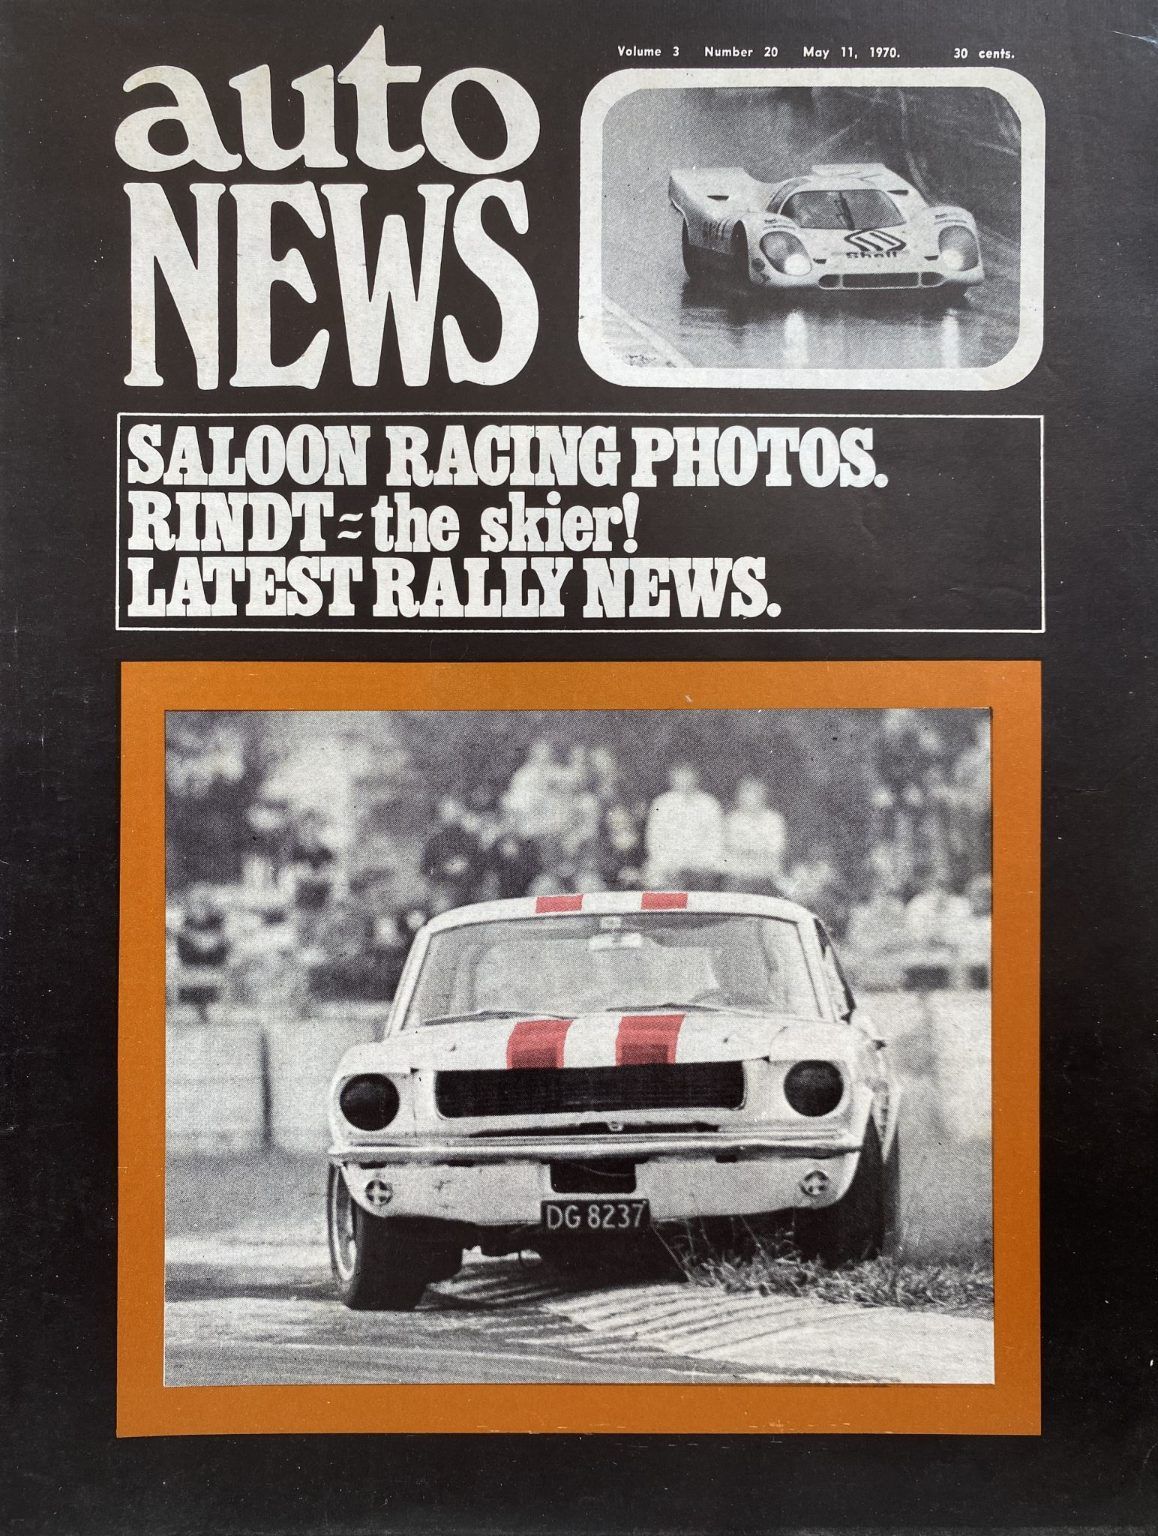 OLD MAGAZINE: Auto News - Vol. 3, Number 20, 11th May 1970